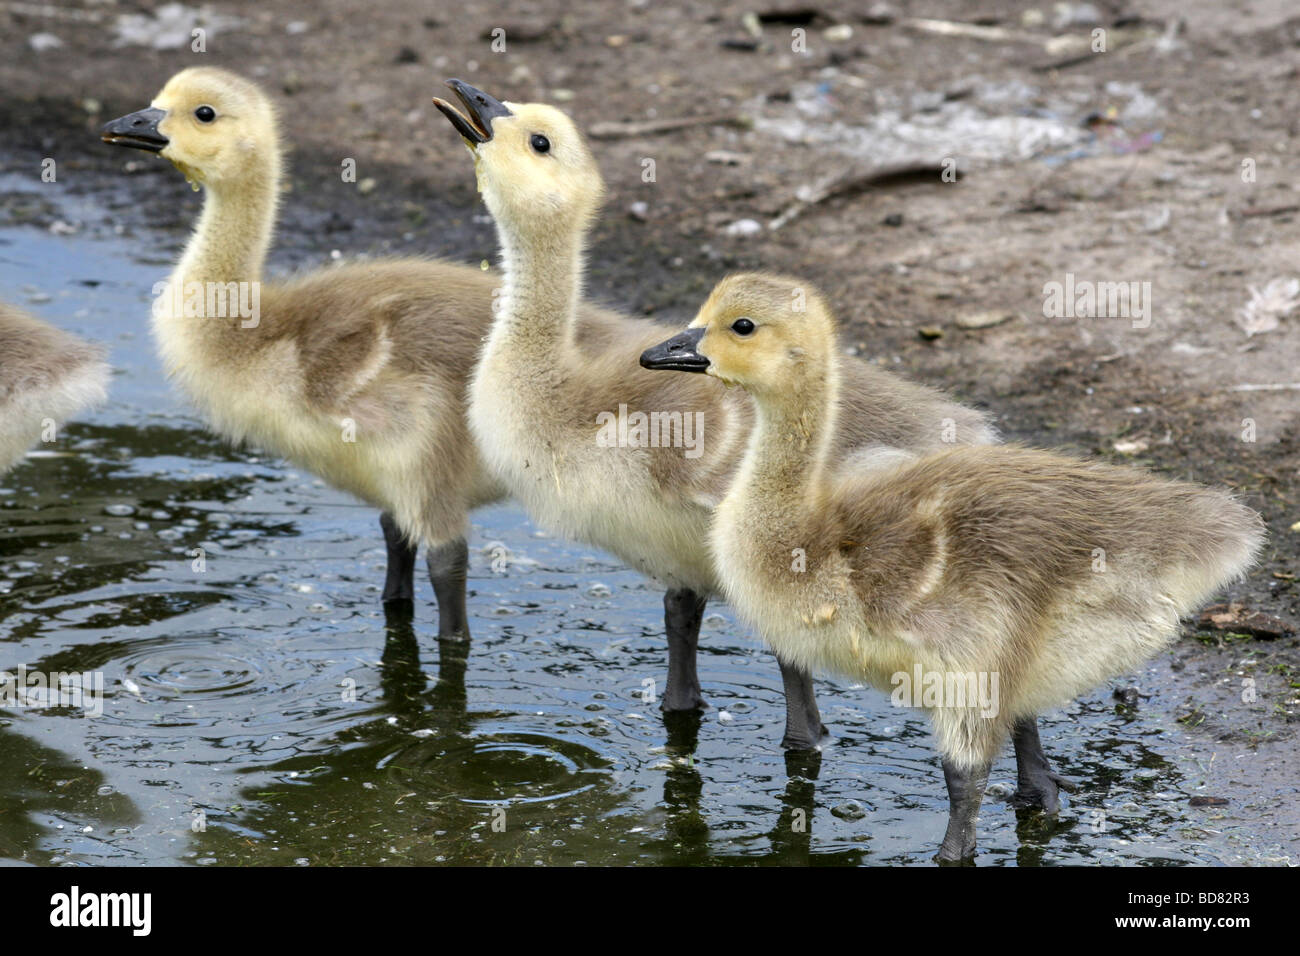 Canada Goose Branta canadensis Goslings Drinking In A Puddle Stock Photo